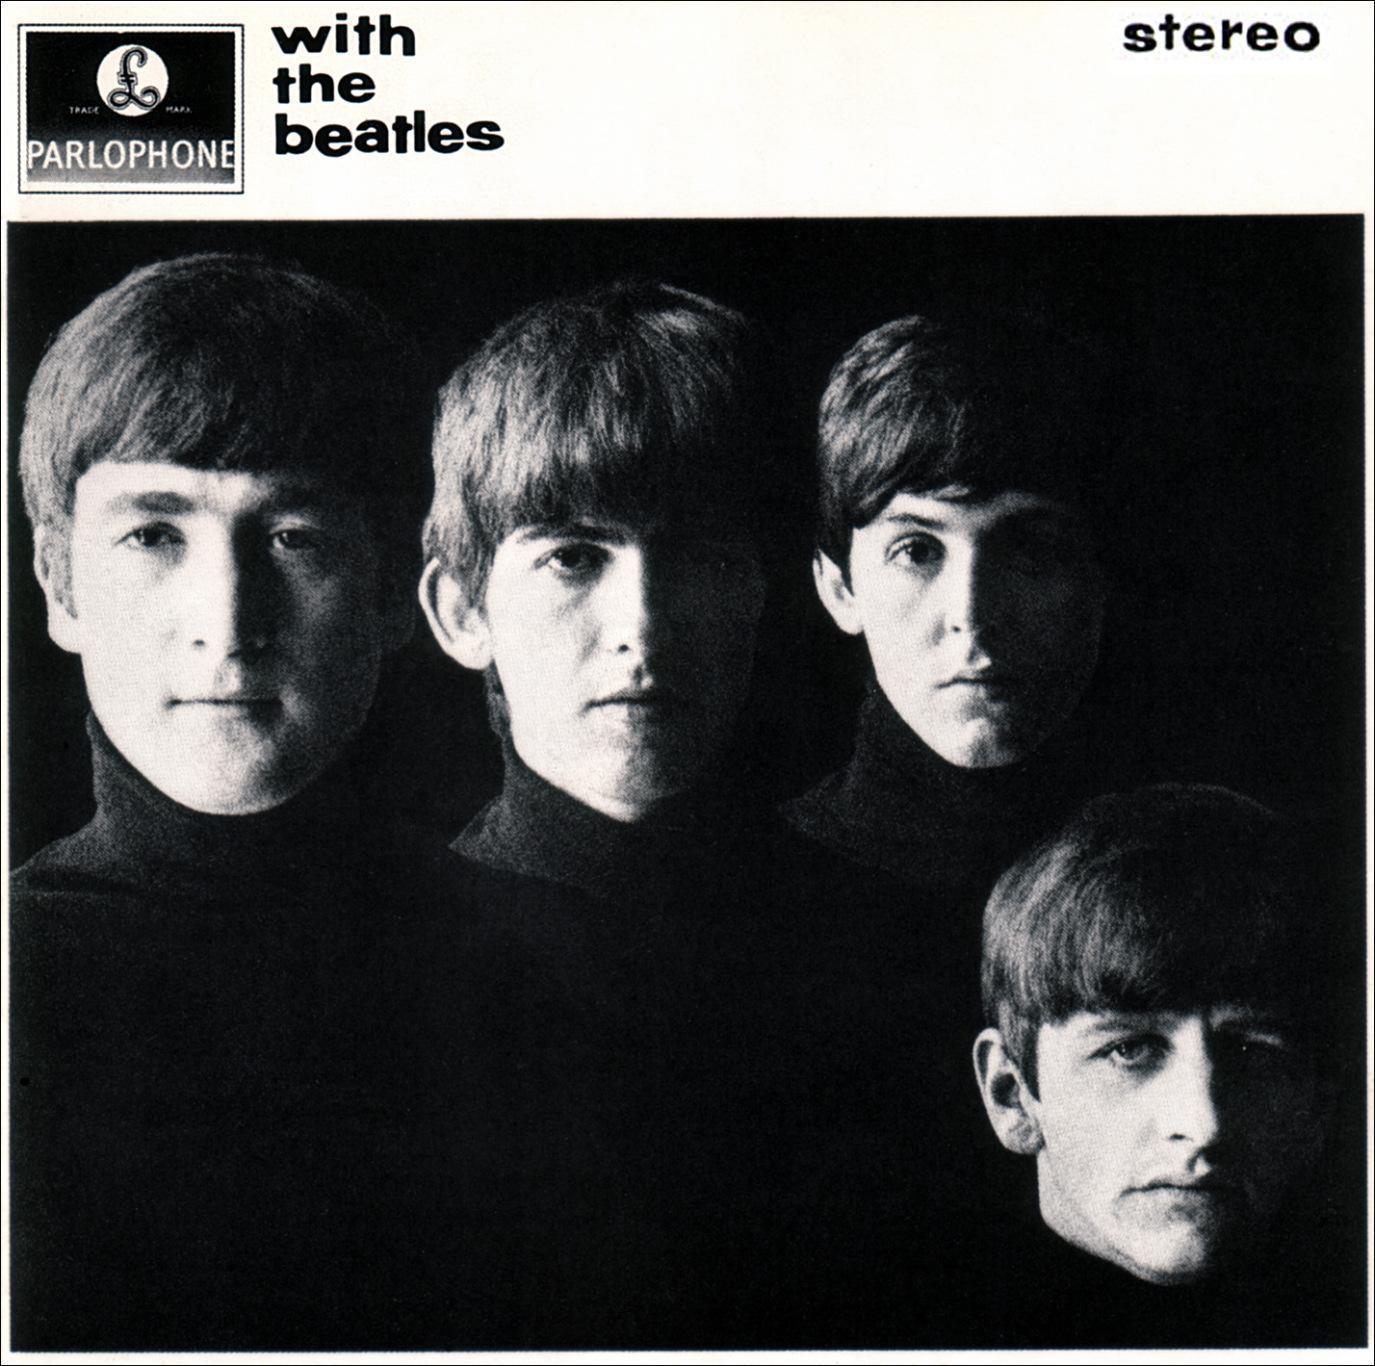 9. With the Beatles (1963)